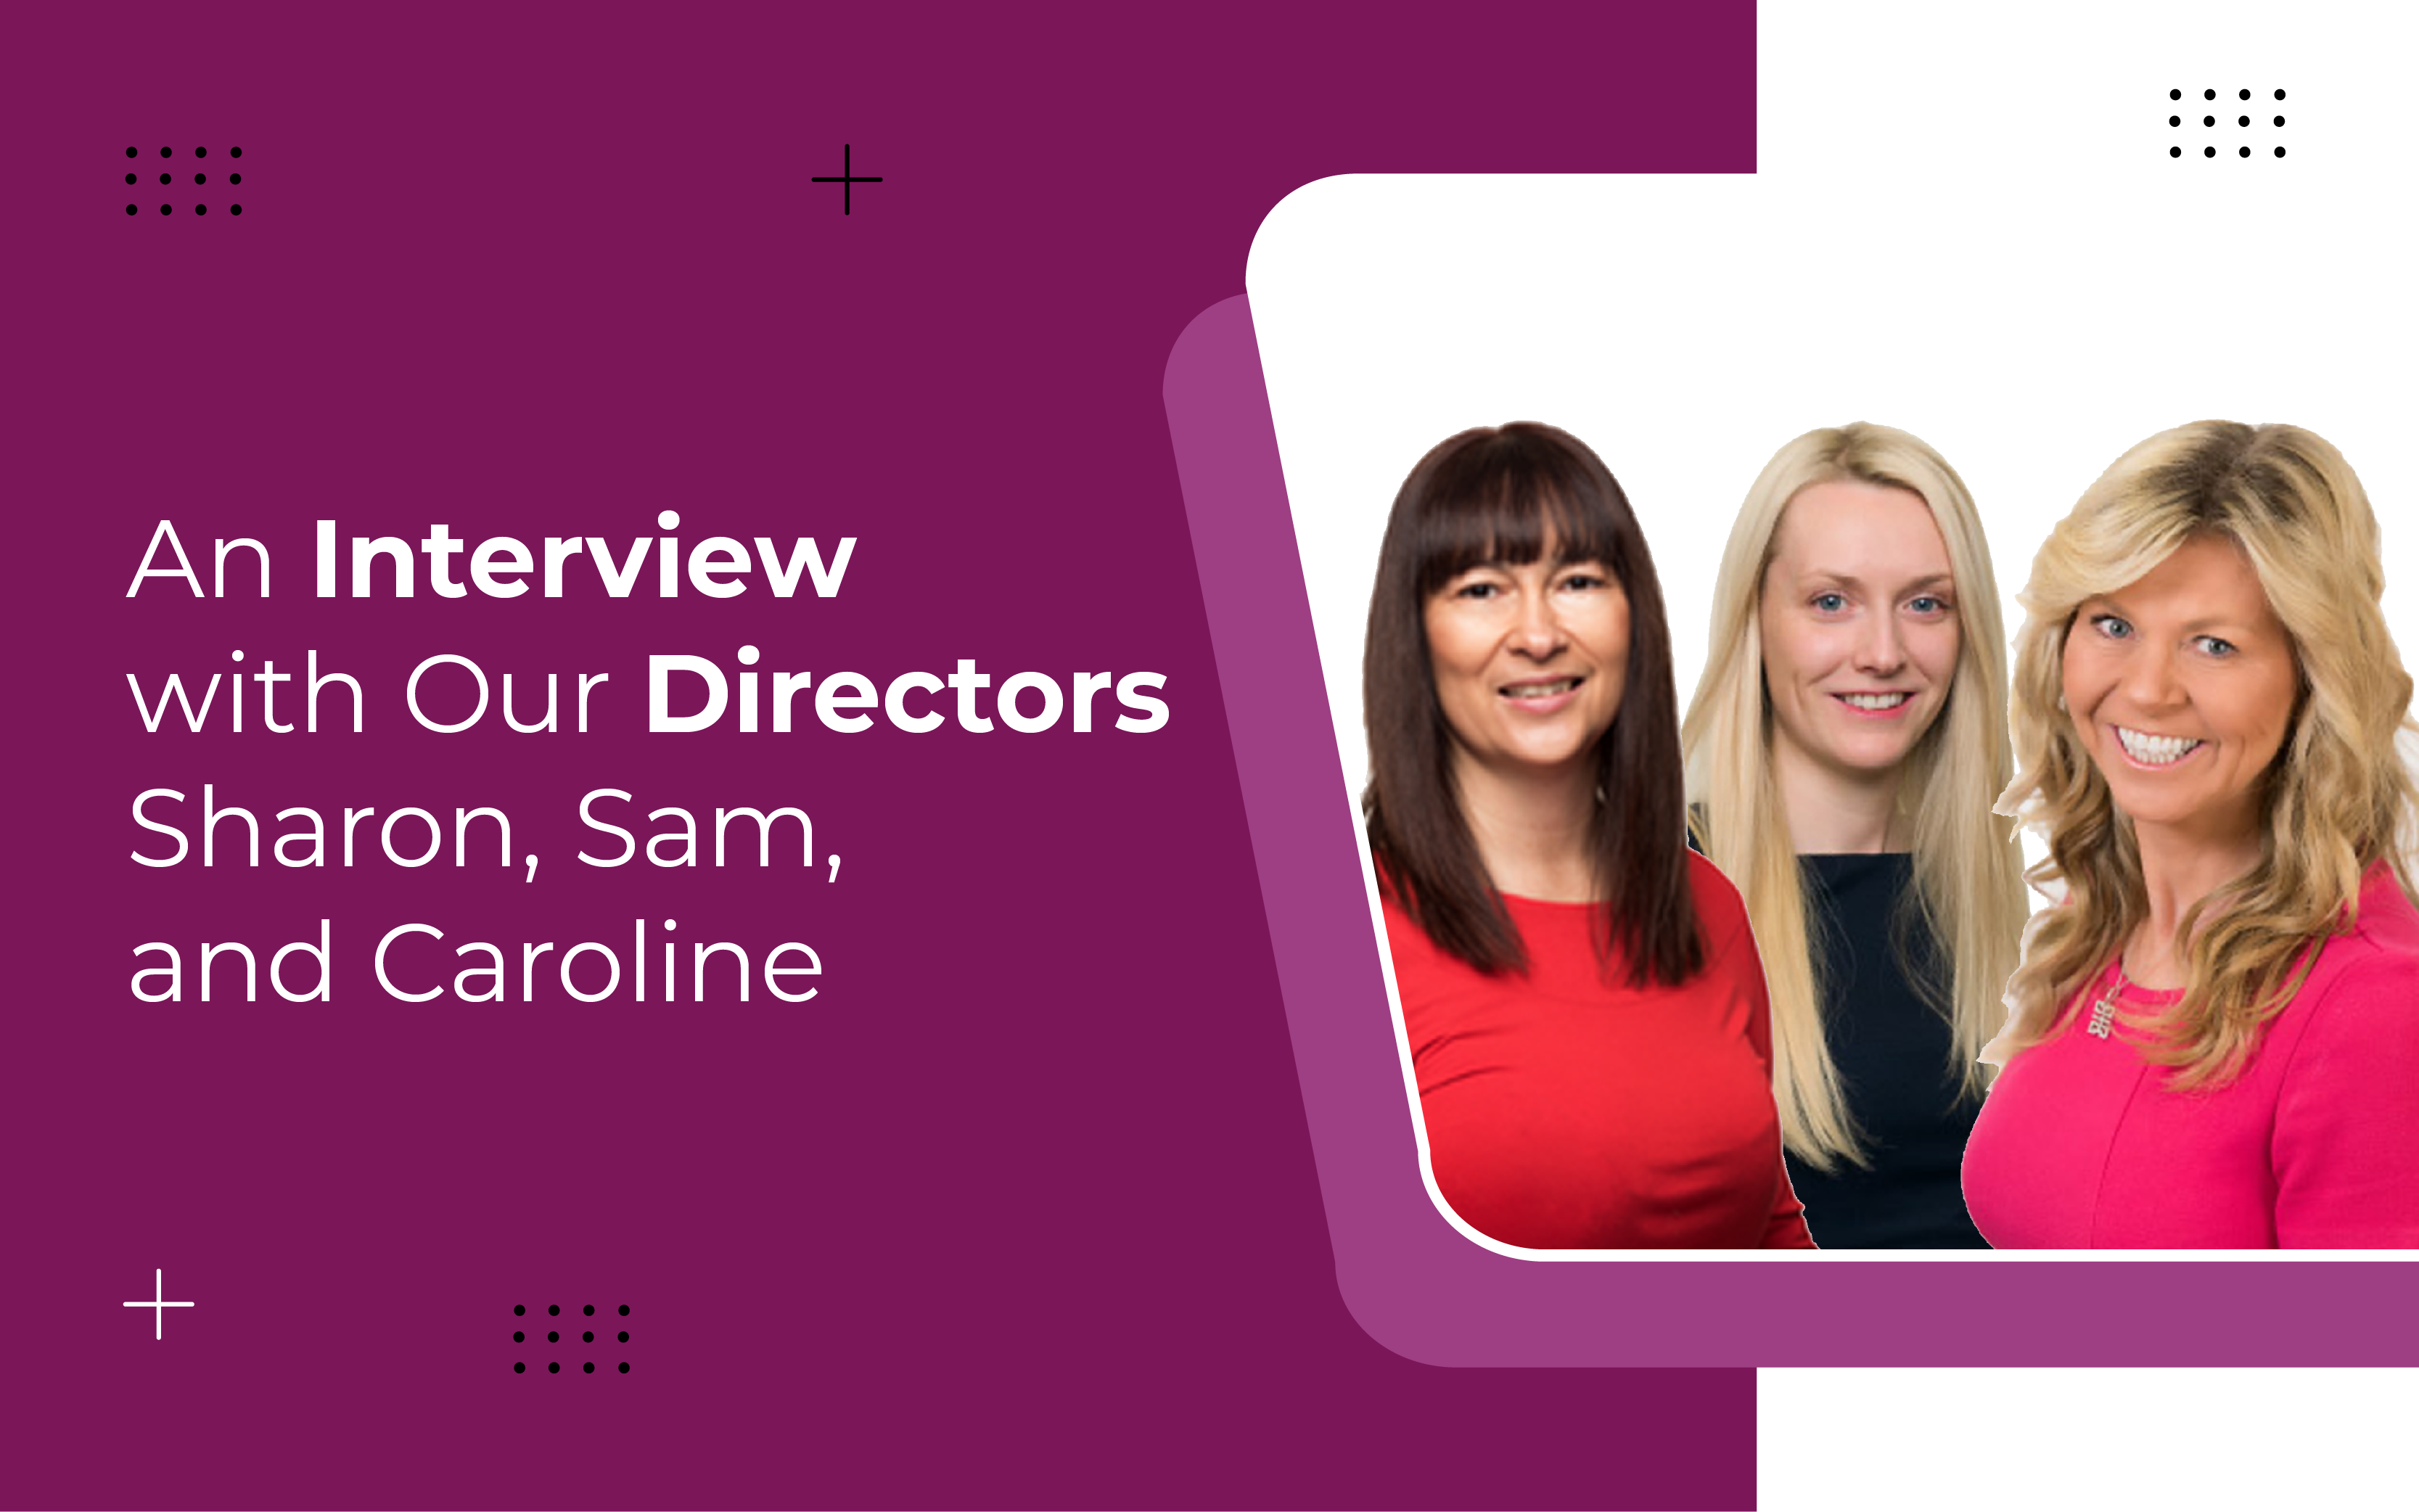 An interview with our Directors Sharon, Sam, and Caroline